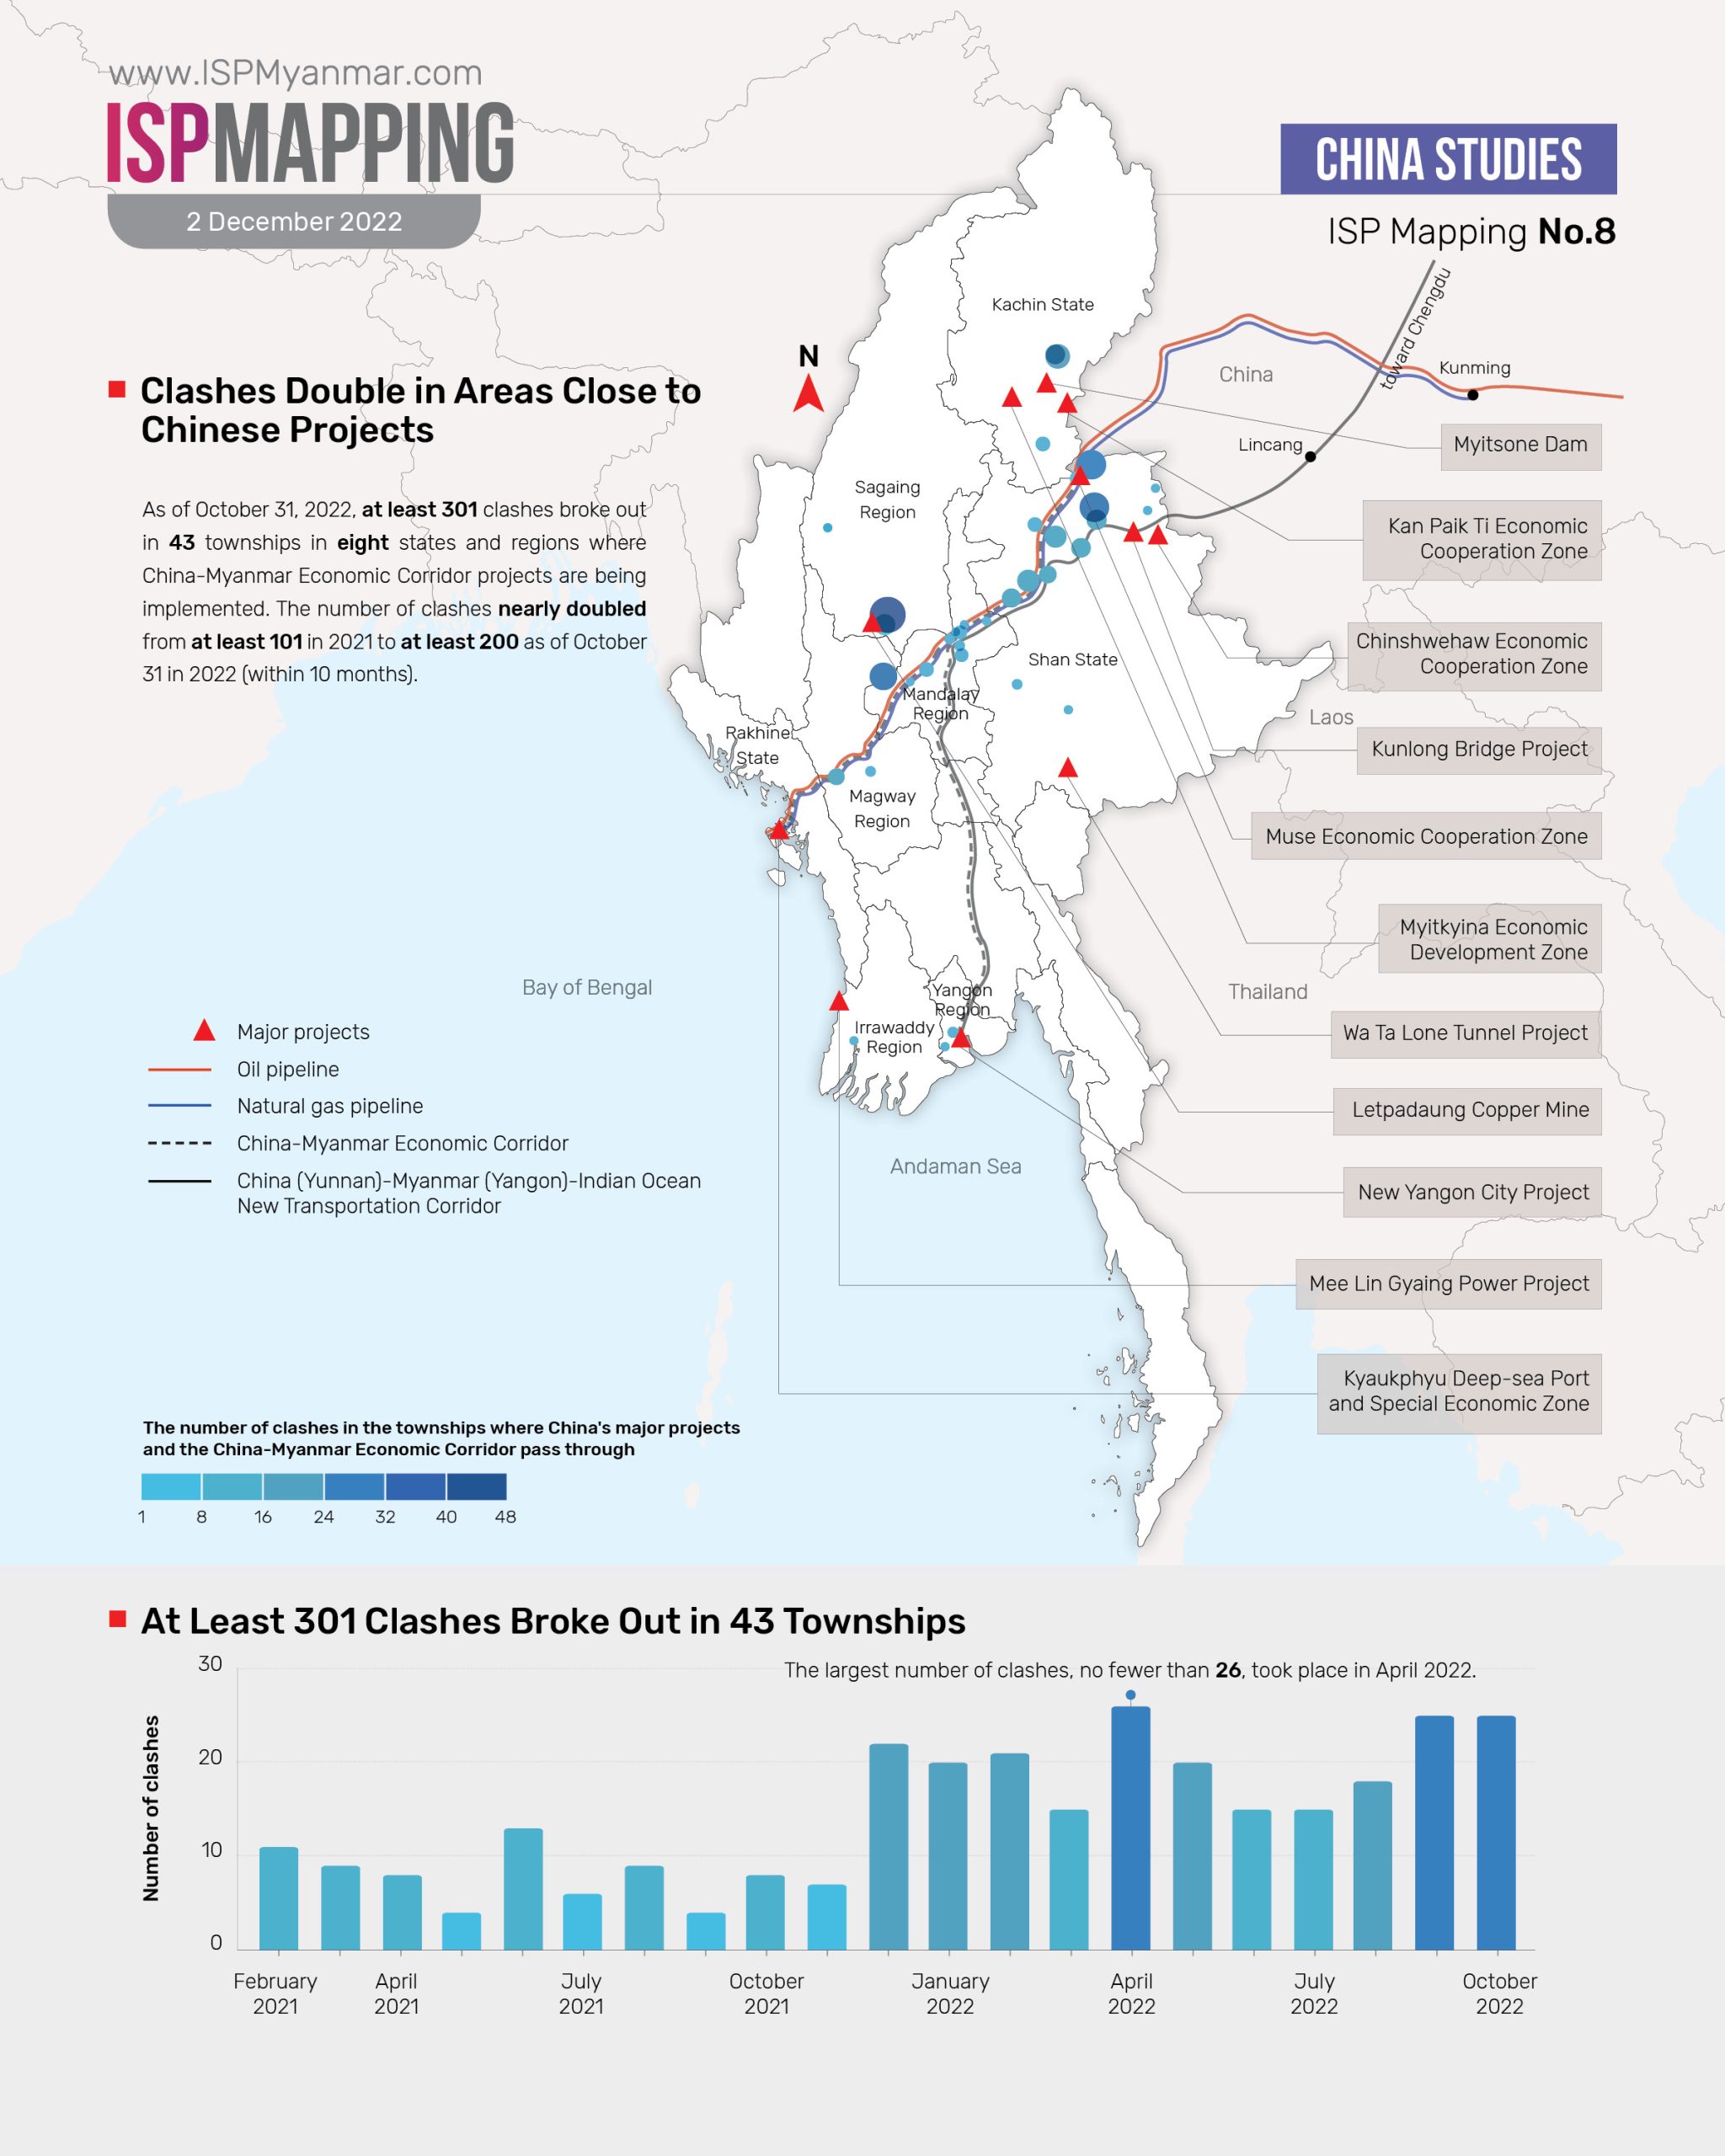 Clashes Double in Areas Close to Chinese Projects